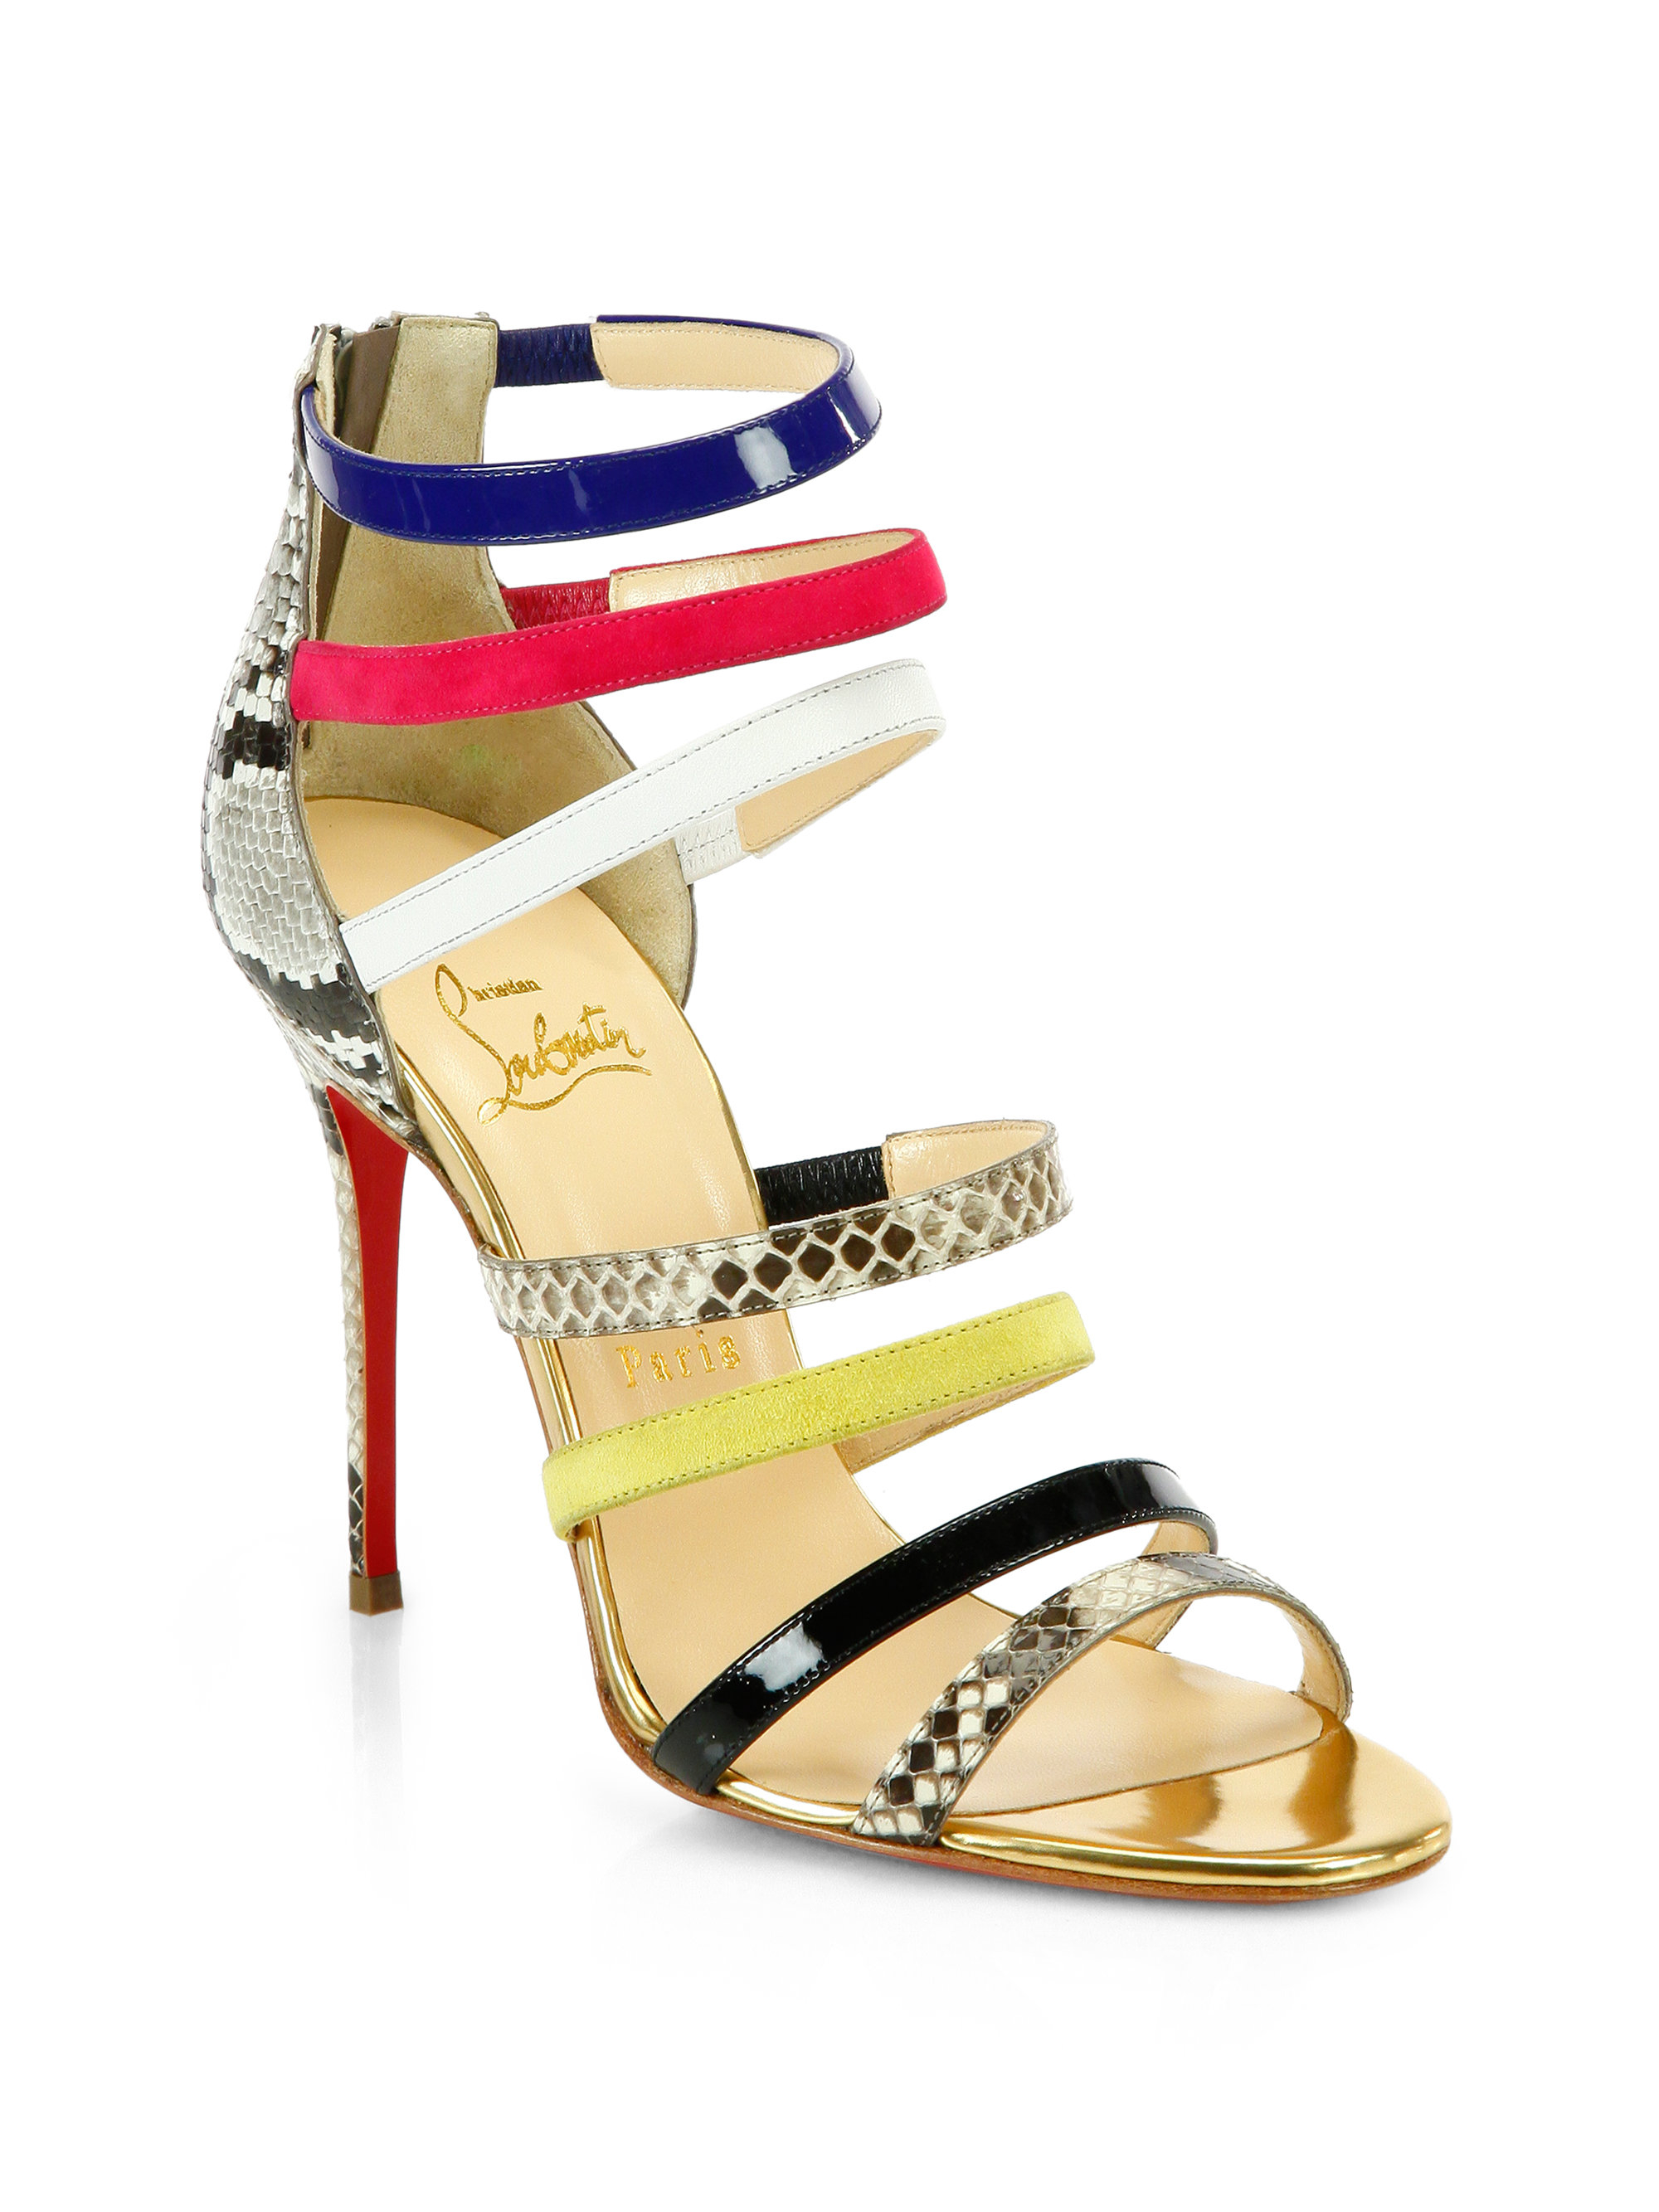 Christian louboutin Marniere Strappy Python Sandals in Multicolor ...